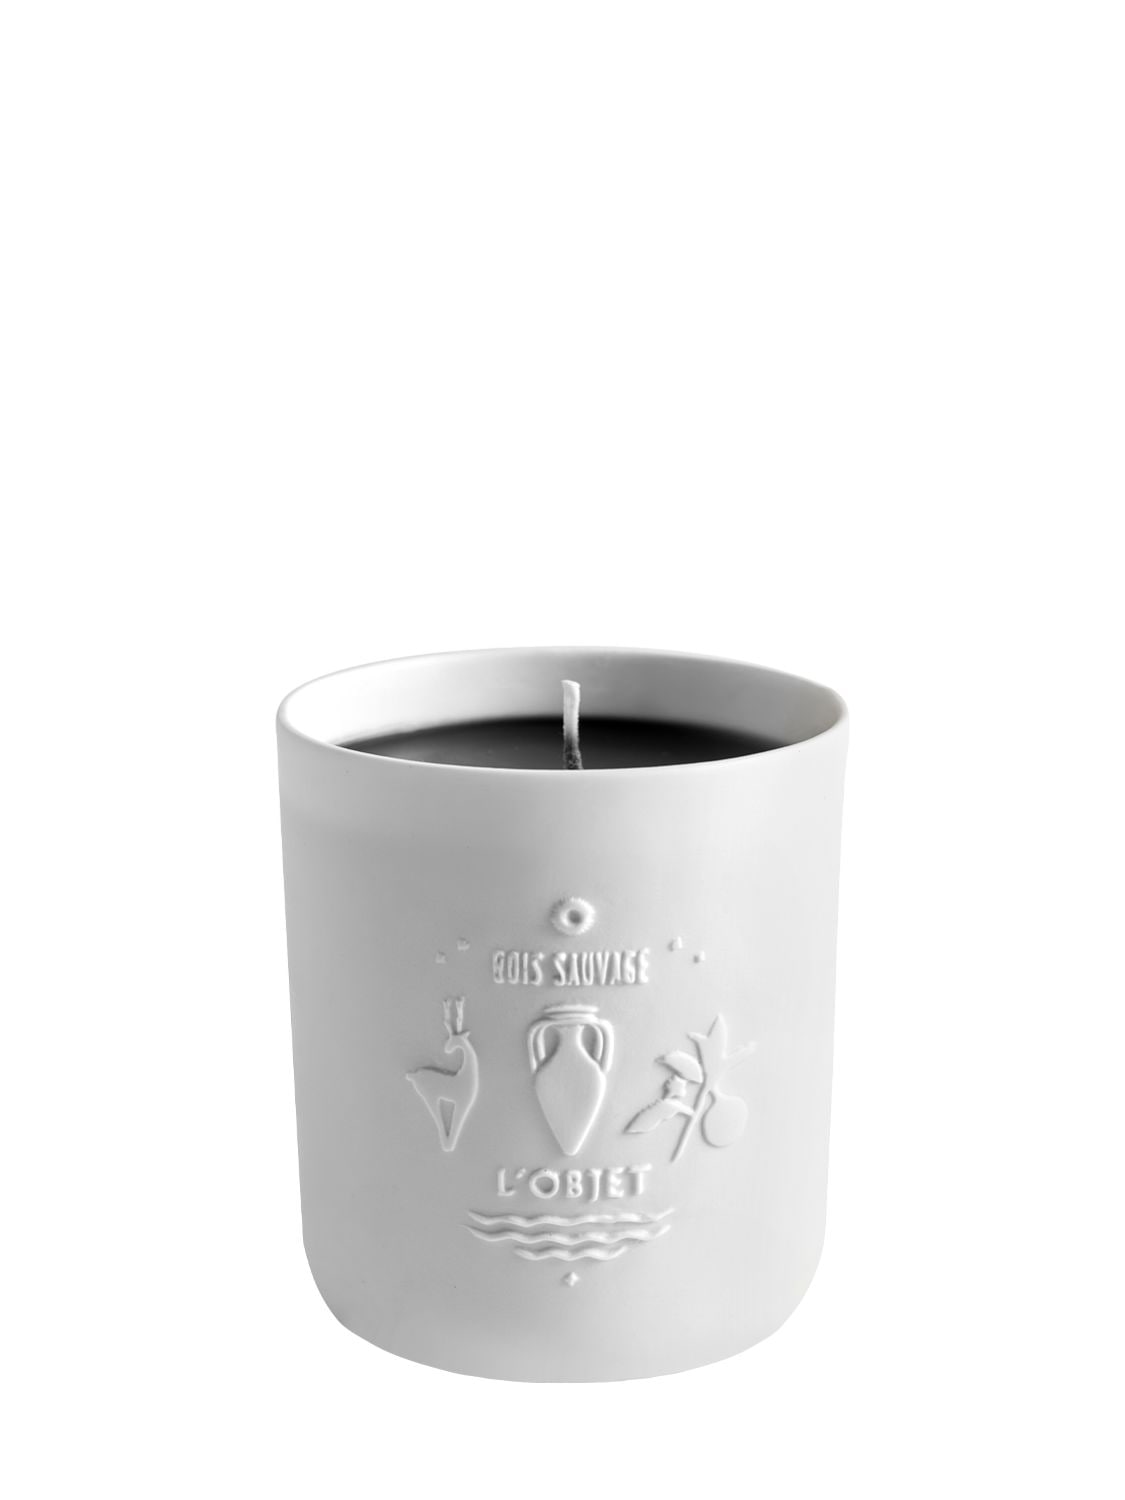 L'OBJET BOIS SAUVAGE APOTHECARY SCENTED CANDLE